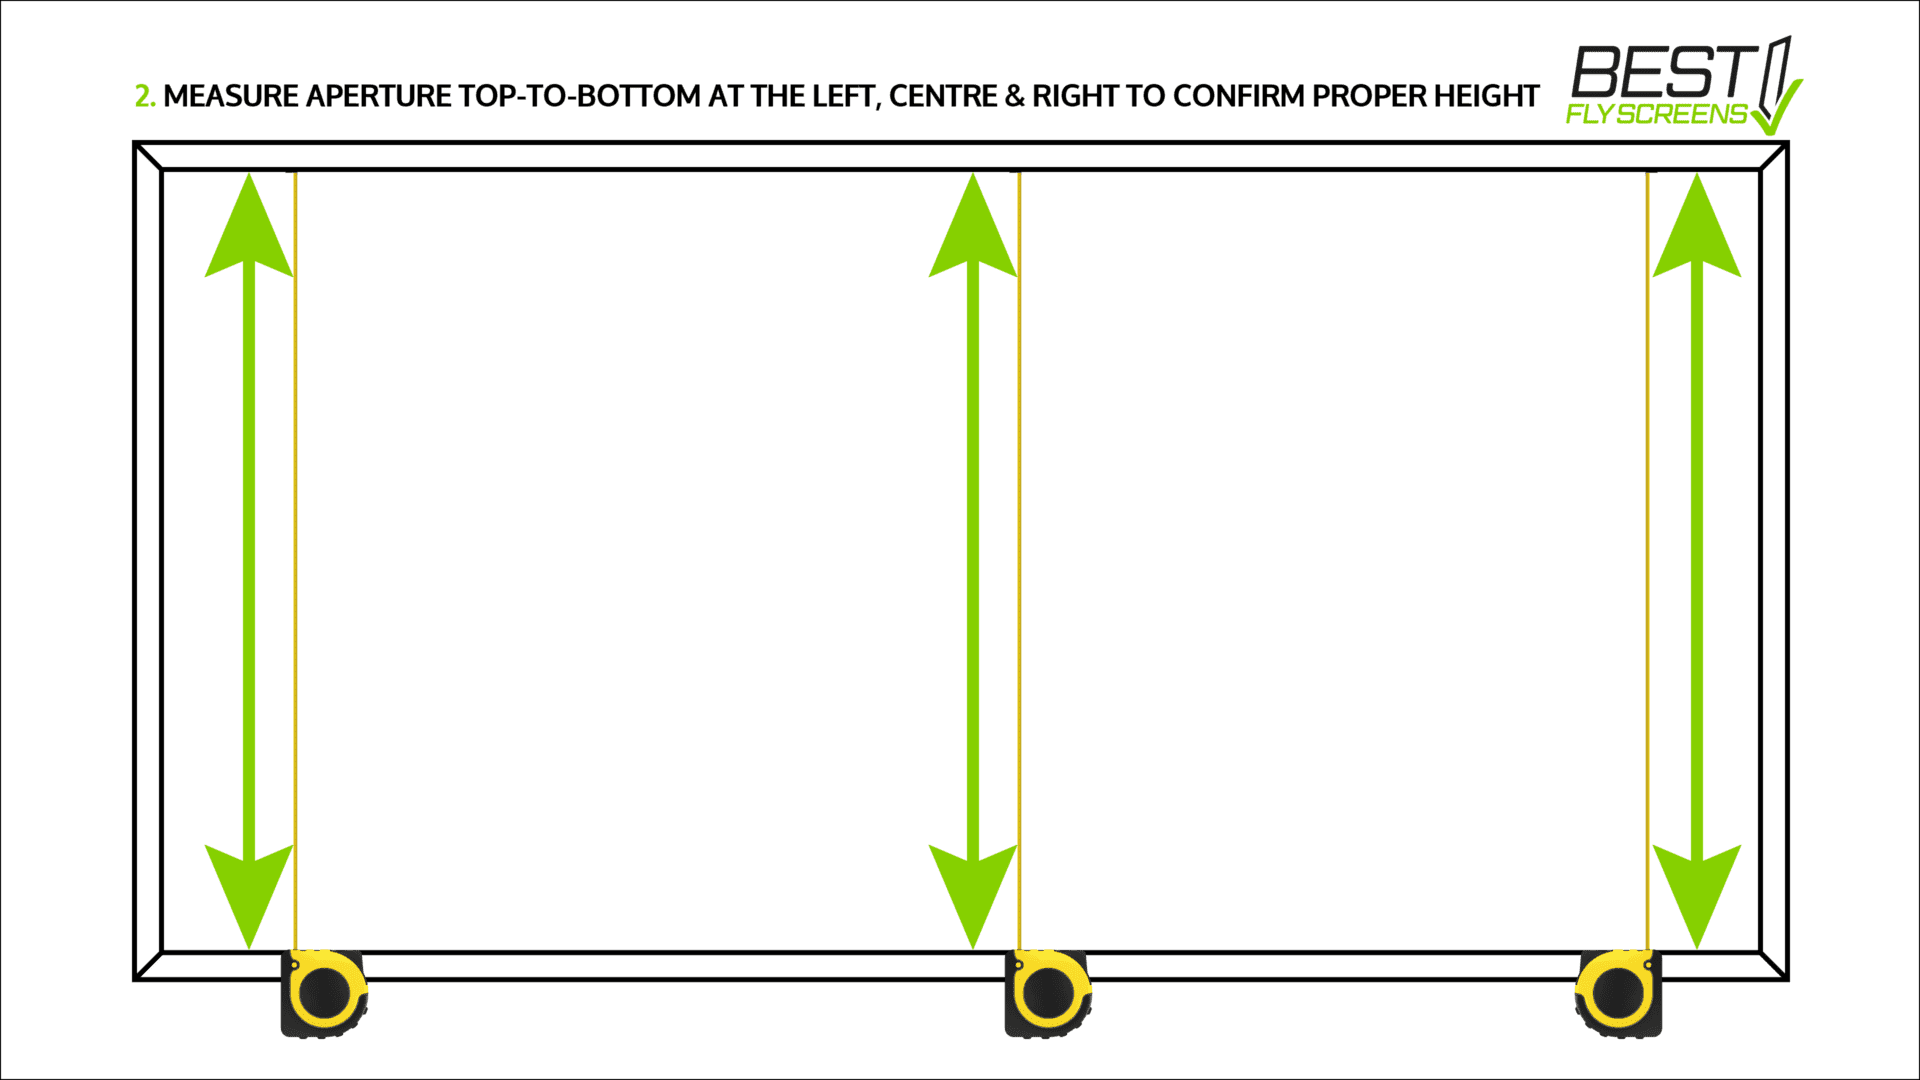 2. Measure aperture top-to-bottom at the LEFT, CENTRE & RIGHT to confirm proper height